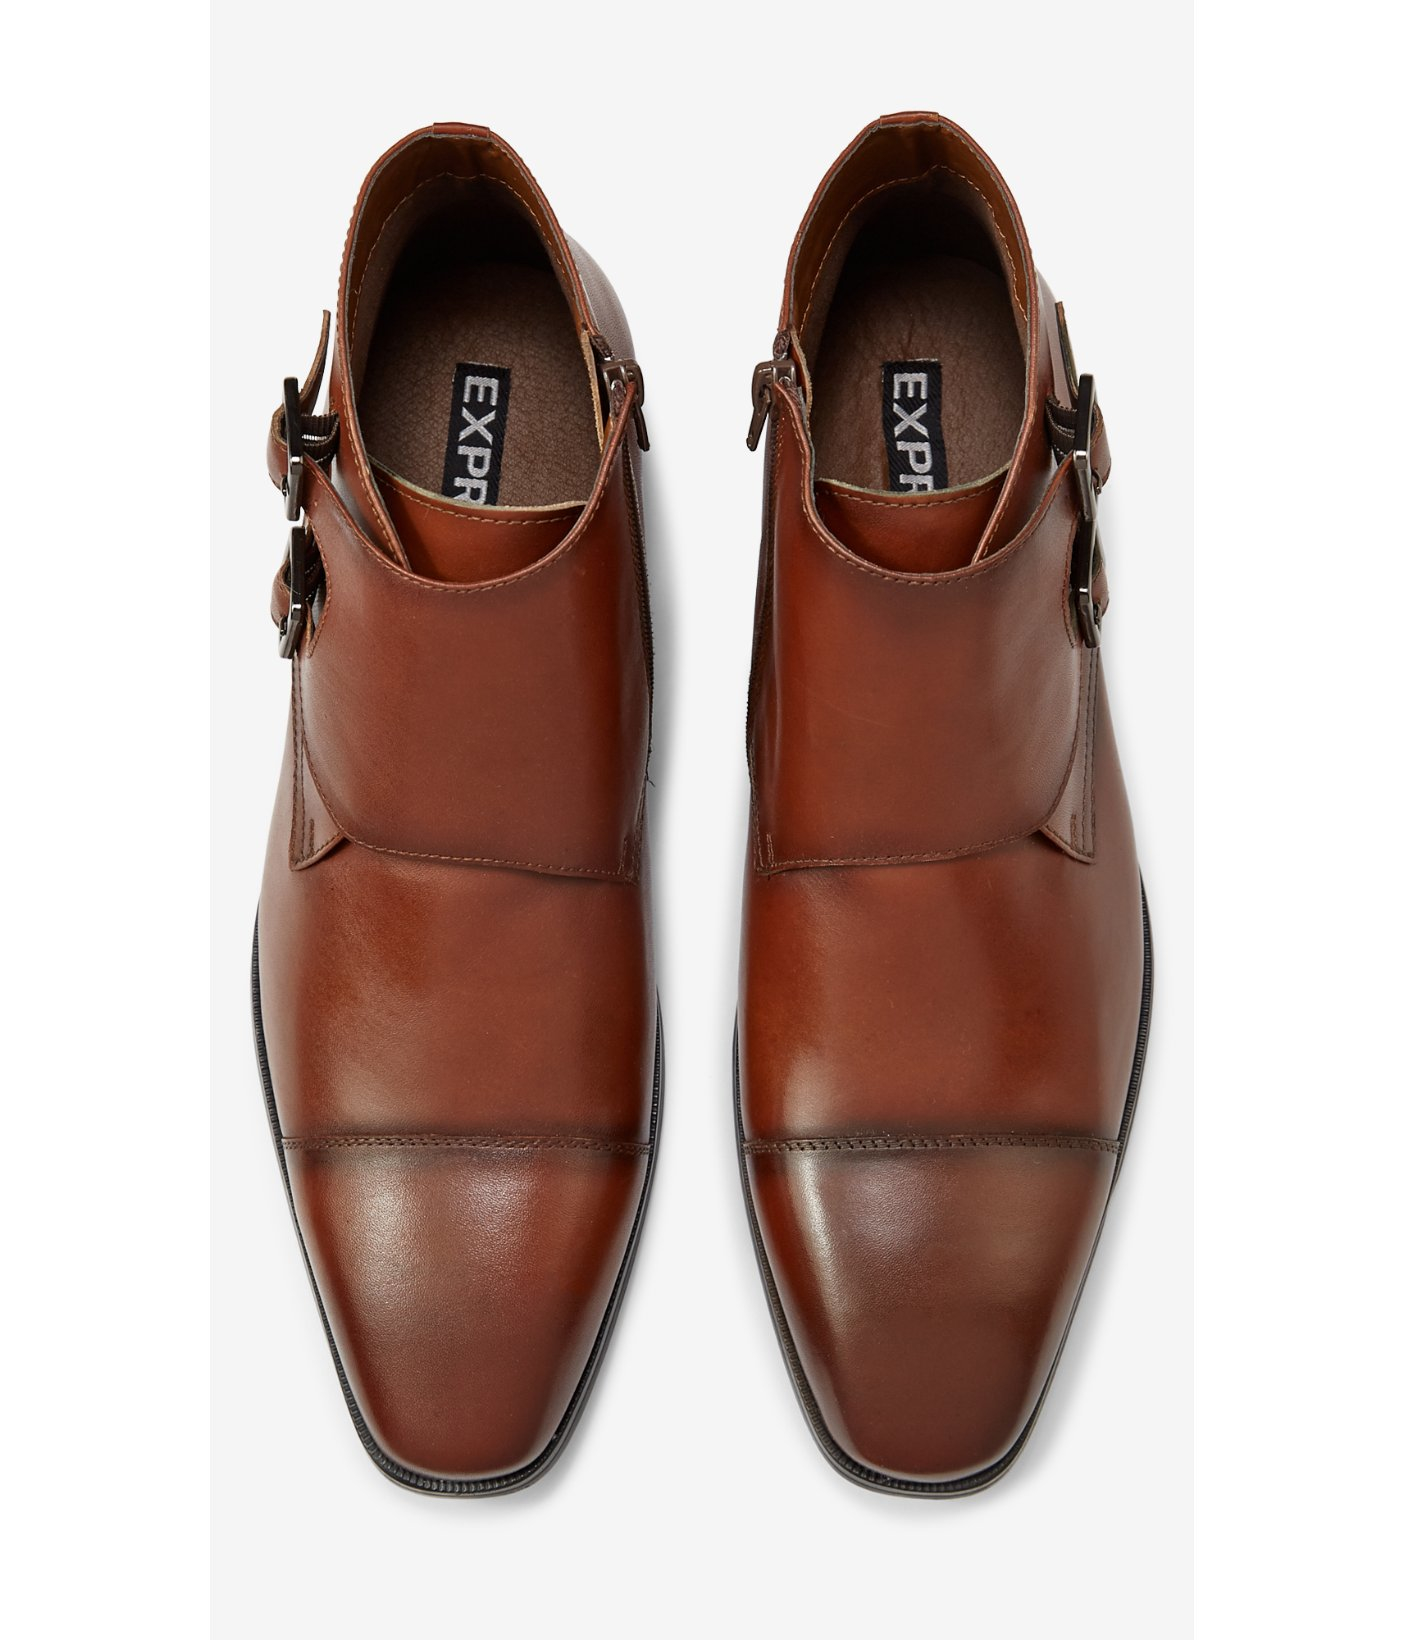 Lyst Express  Leather Monk Strap Dress Shoe  in Brown for Men